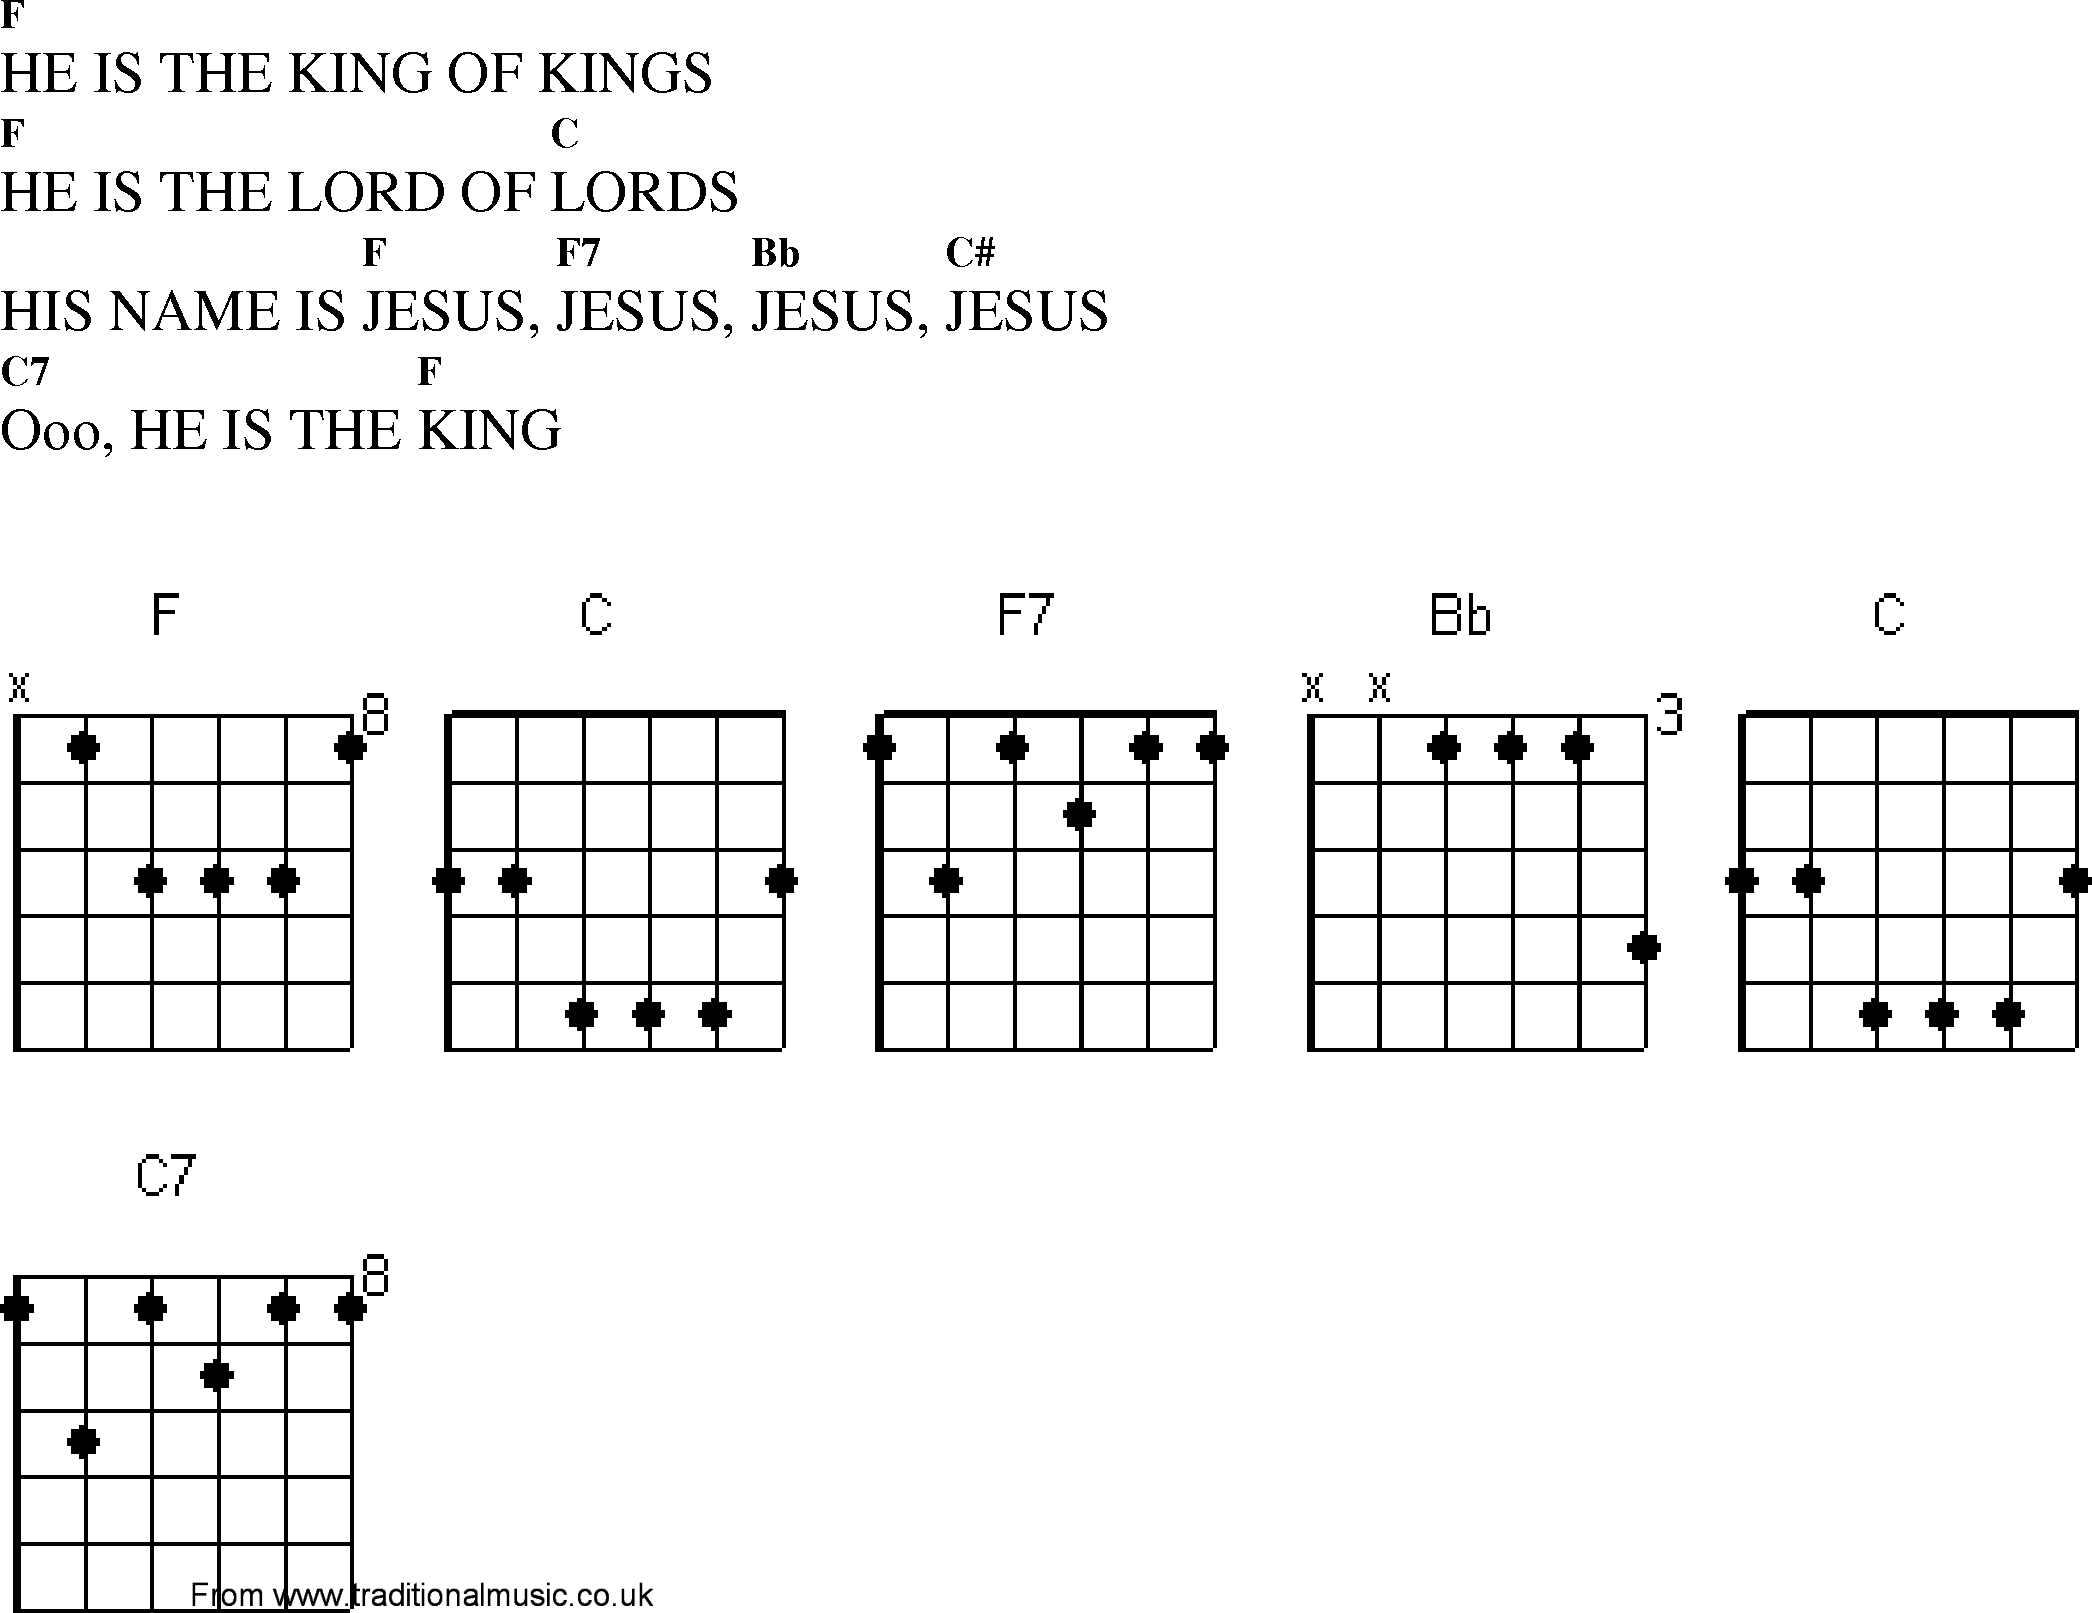 Gospel Song: he_is_the_king_of_kings, lyrics and chords.